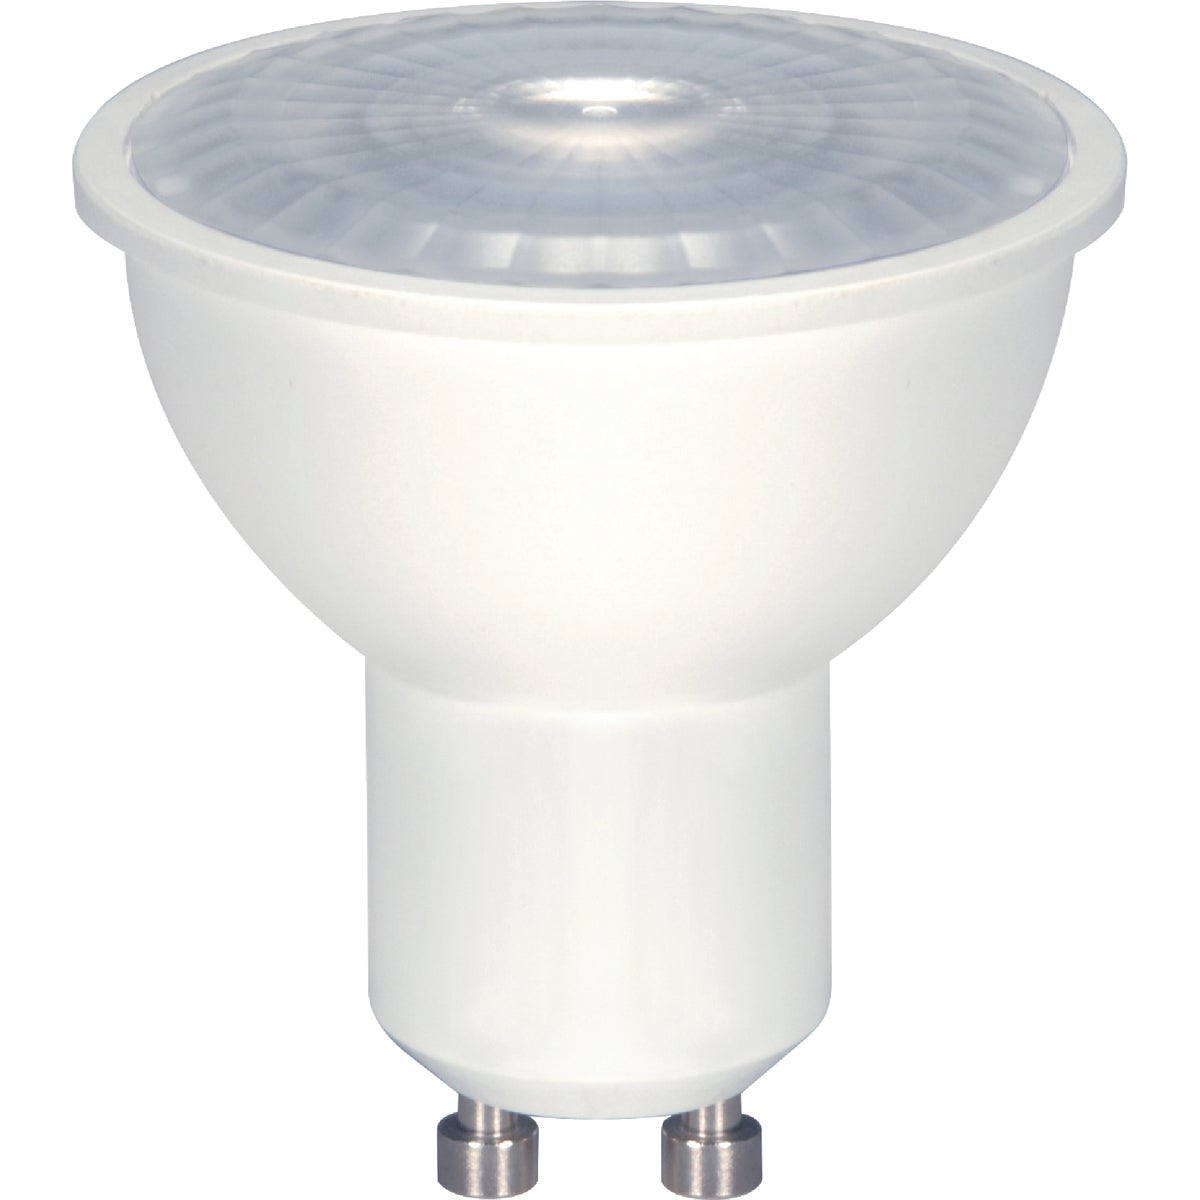 Item 500438, MR16 dimmable LED (light emitting diode) light bulb with GU10 base.